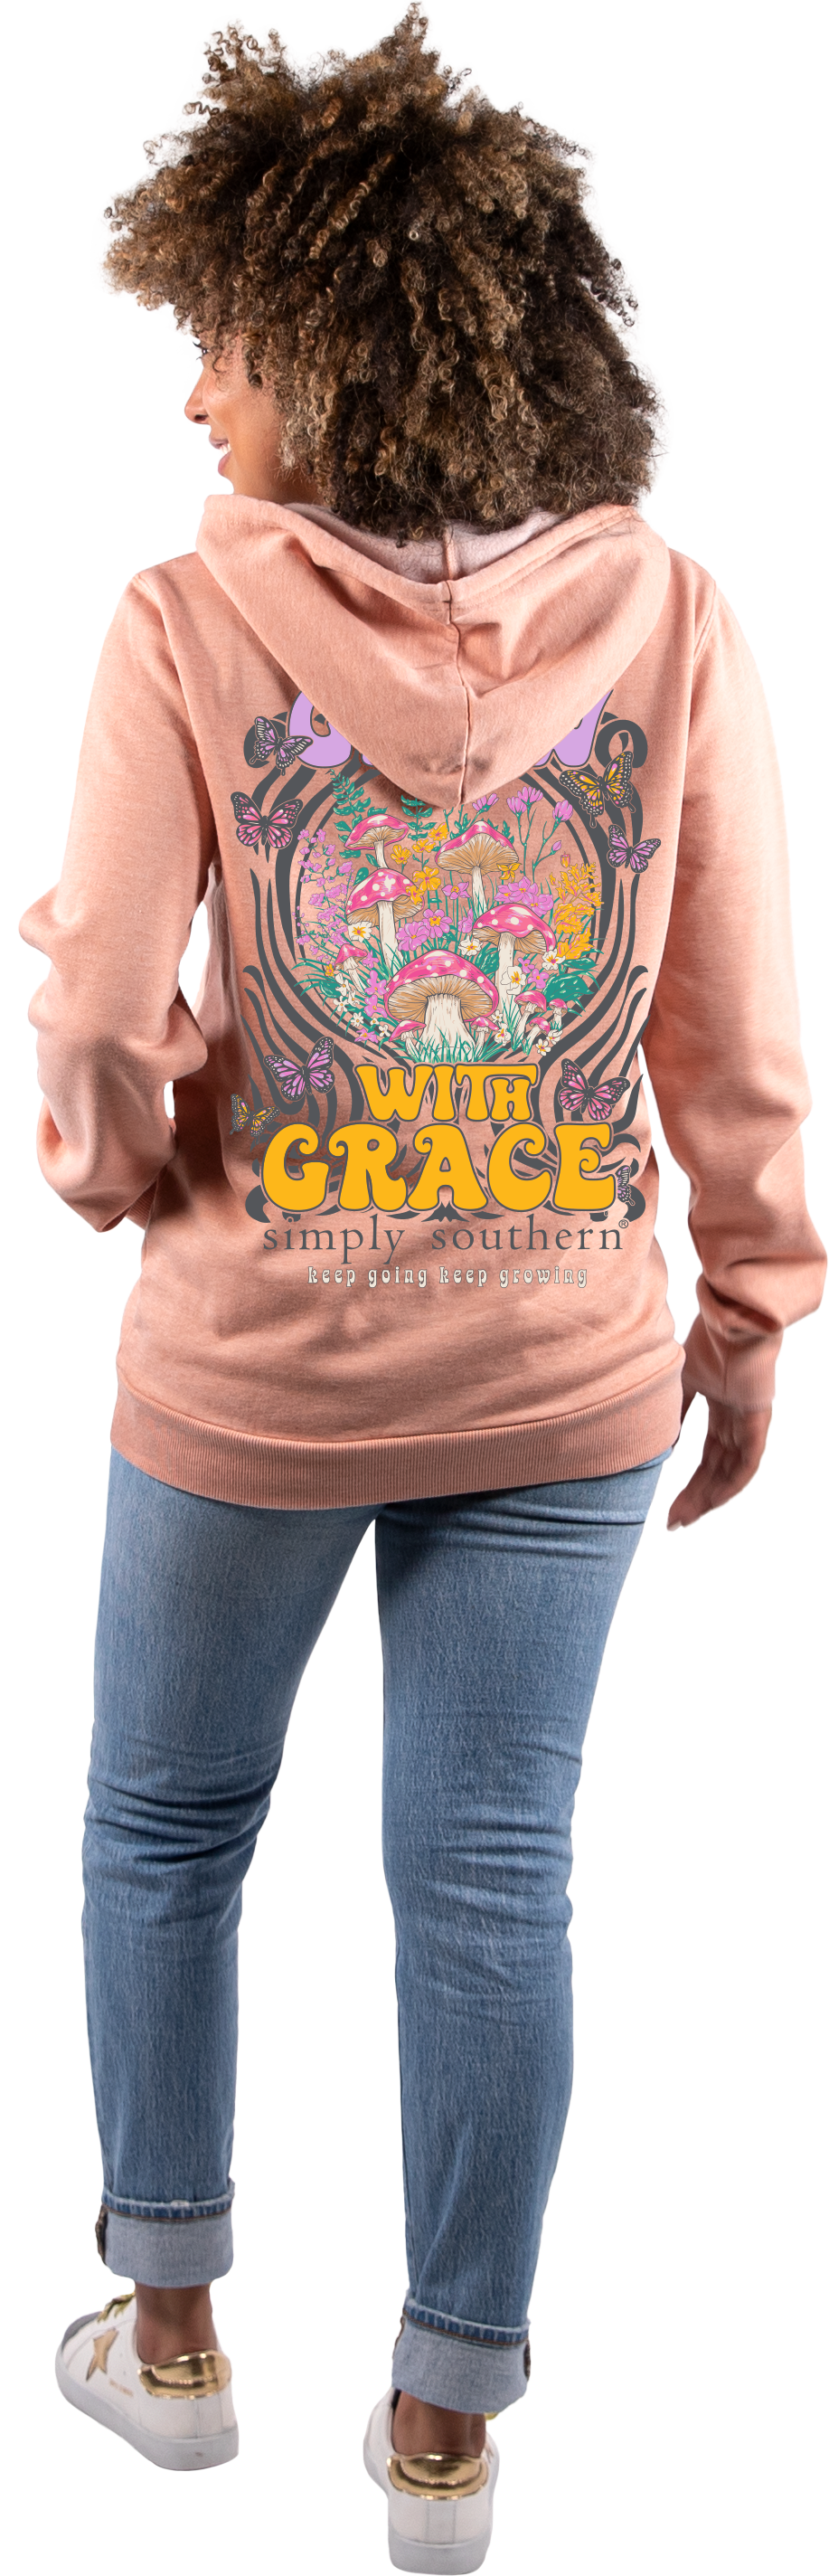 Simply Southern Grow With Grace Hoodie